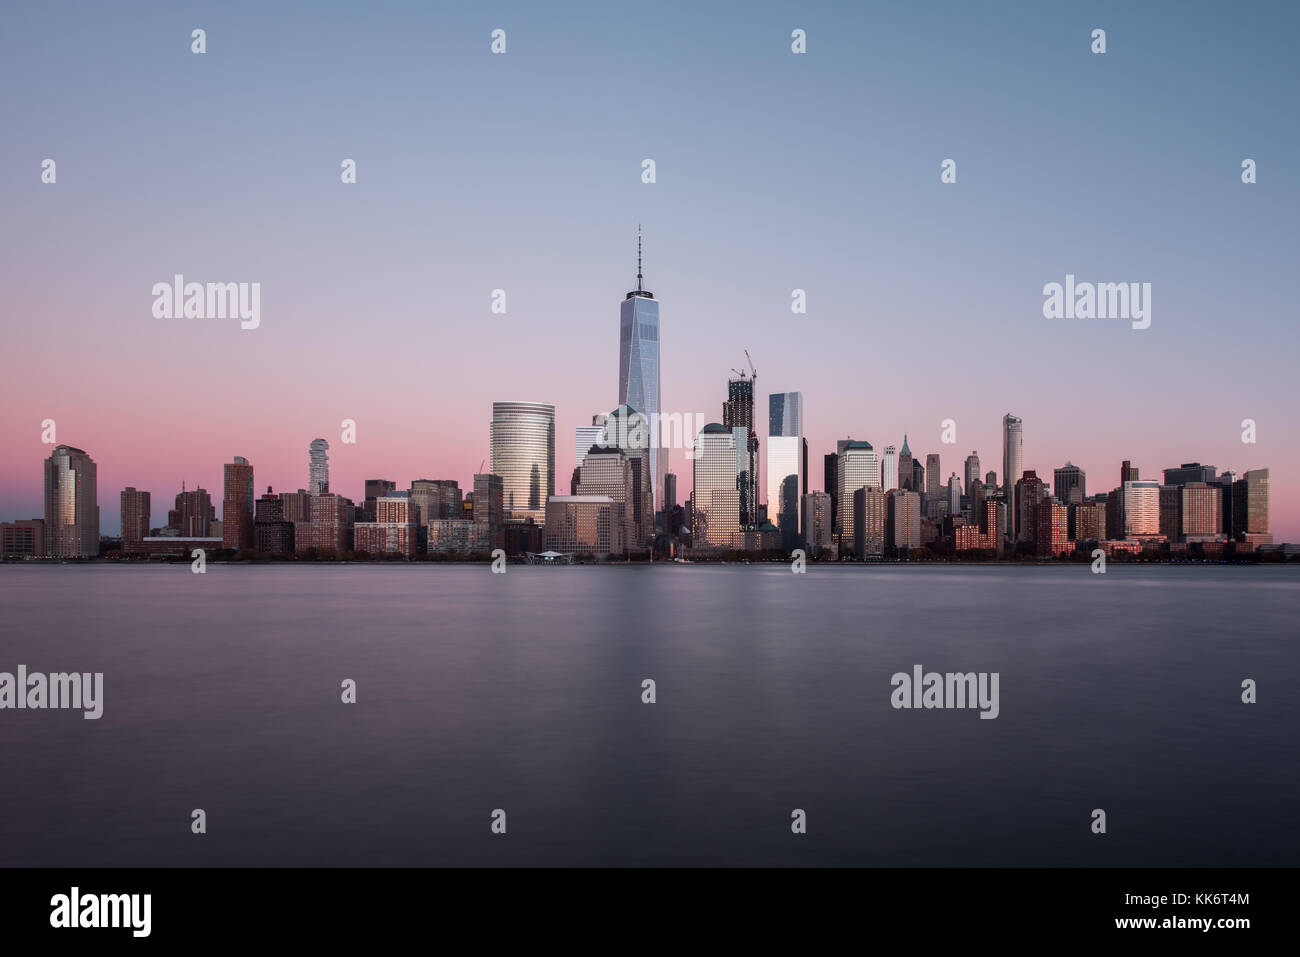 New York skyline as viewed across the Hudson River in New Jersey at sunset. Stock Photo